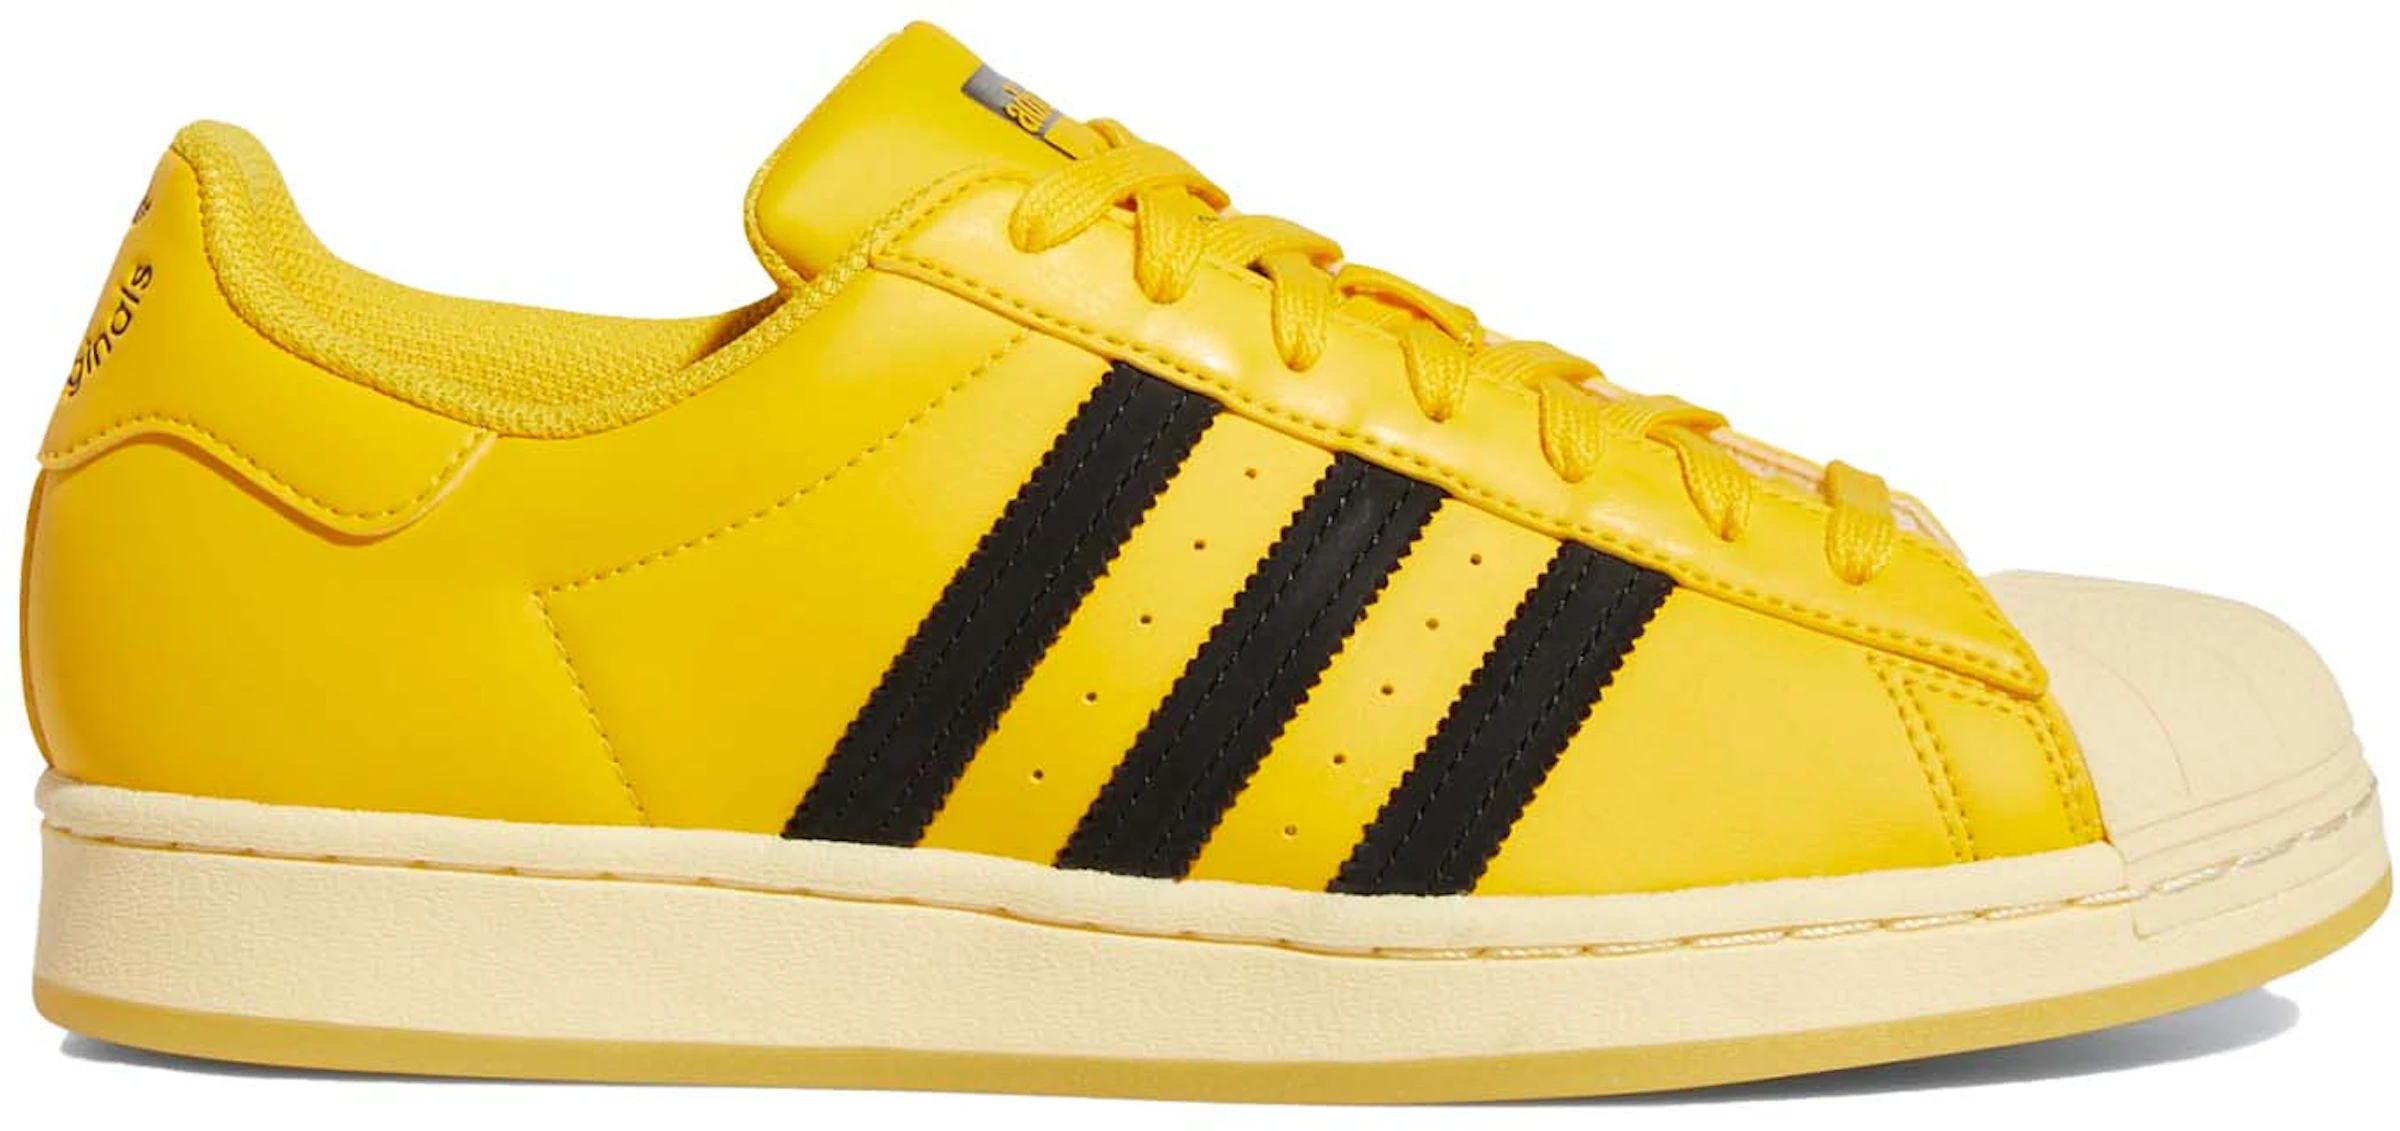 Ondergedompeld aan de andere kant, Opgetild adidas Superstar Bold Gold Easy Yellow - GY2070 - US